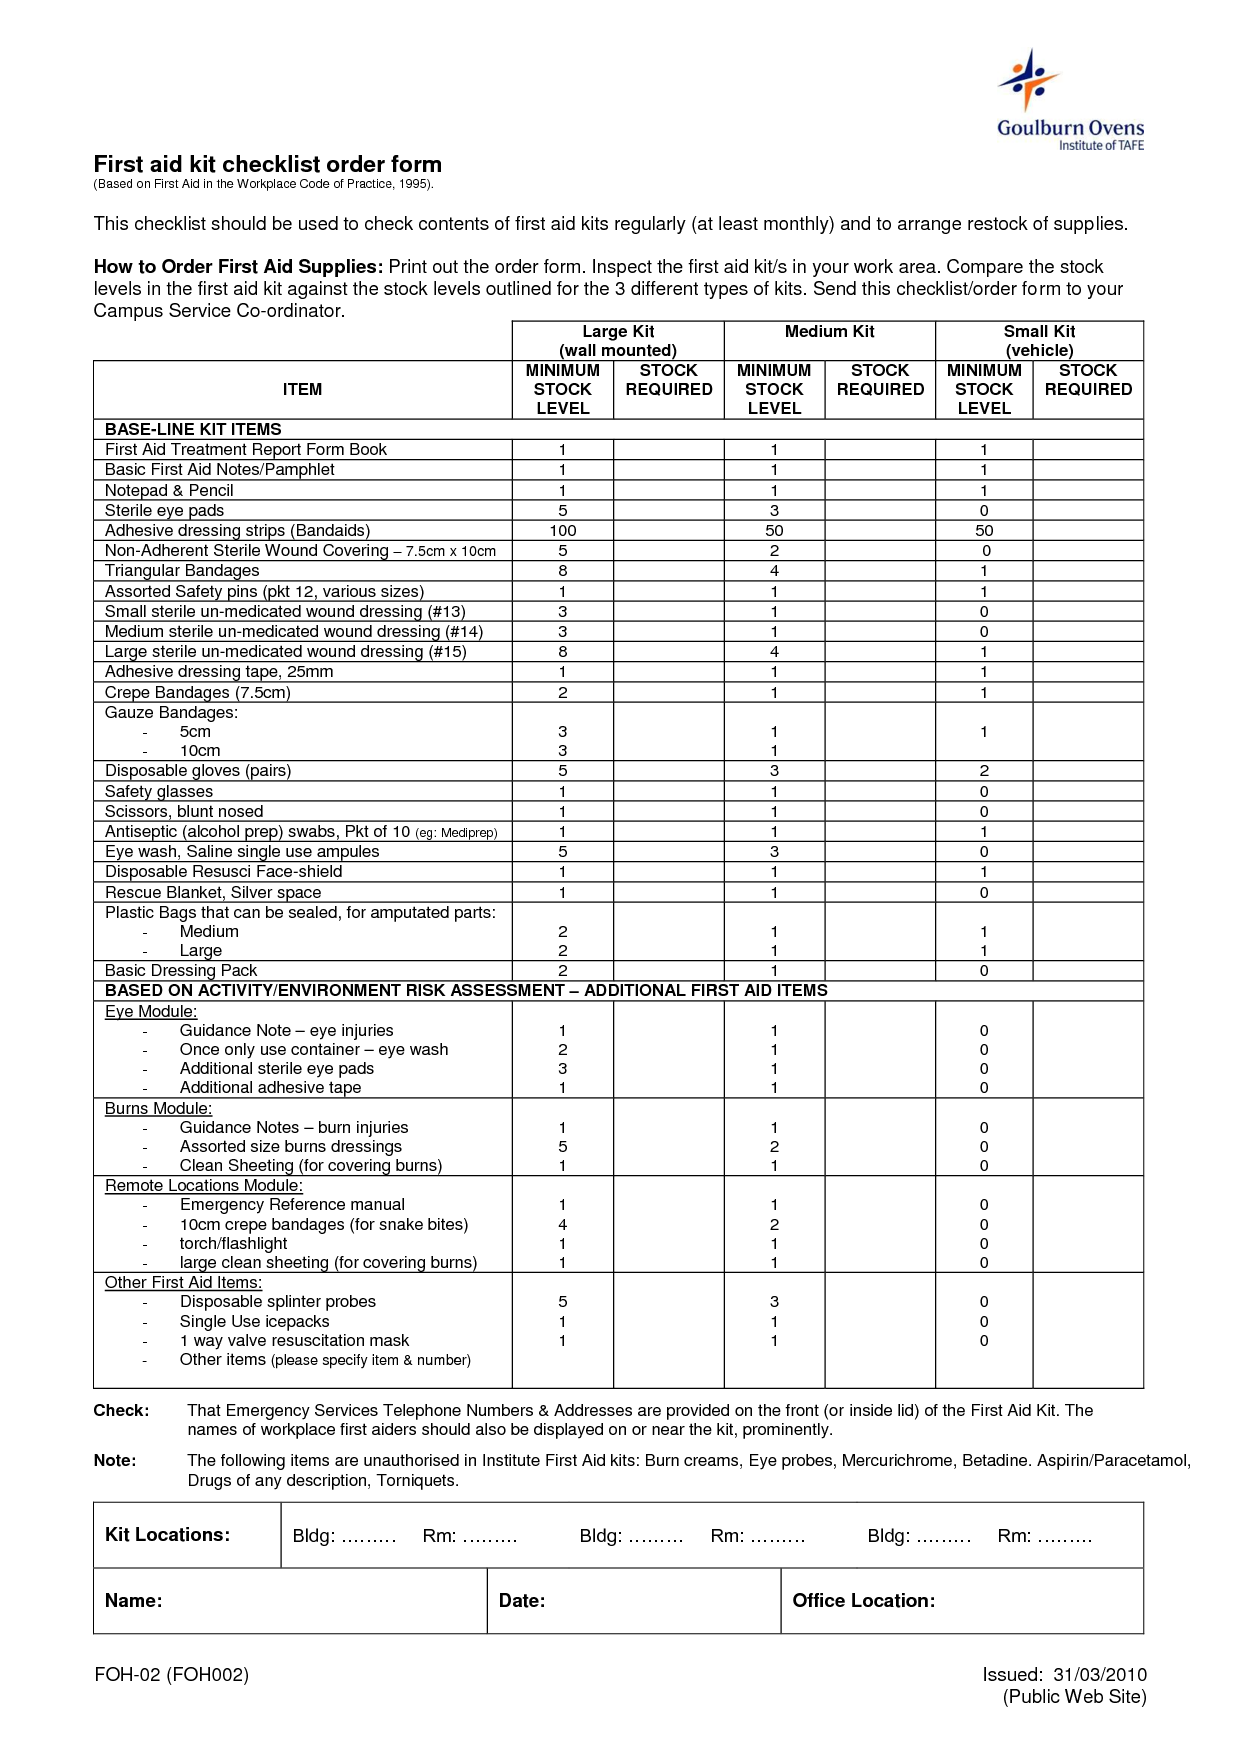 First Aid Kit Checklist Template - The Guide Ways Pertaining To First Aid Kit Contents Checklist Template Throughout First Aid Kit Contents Checklist Template